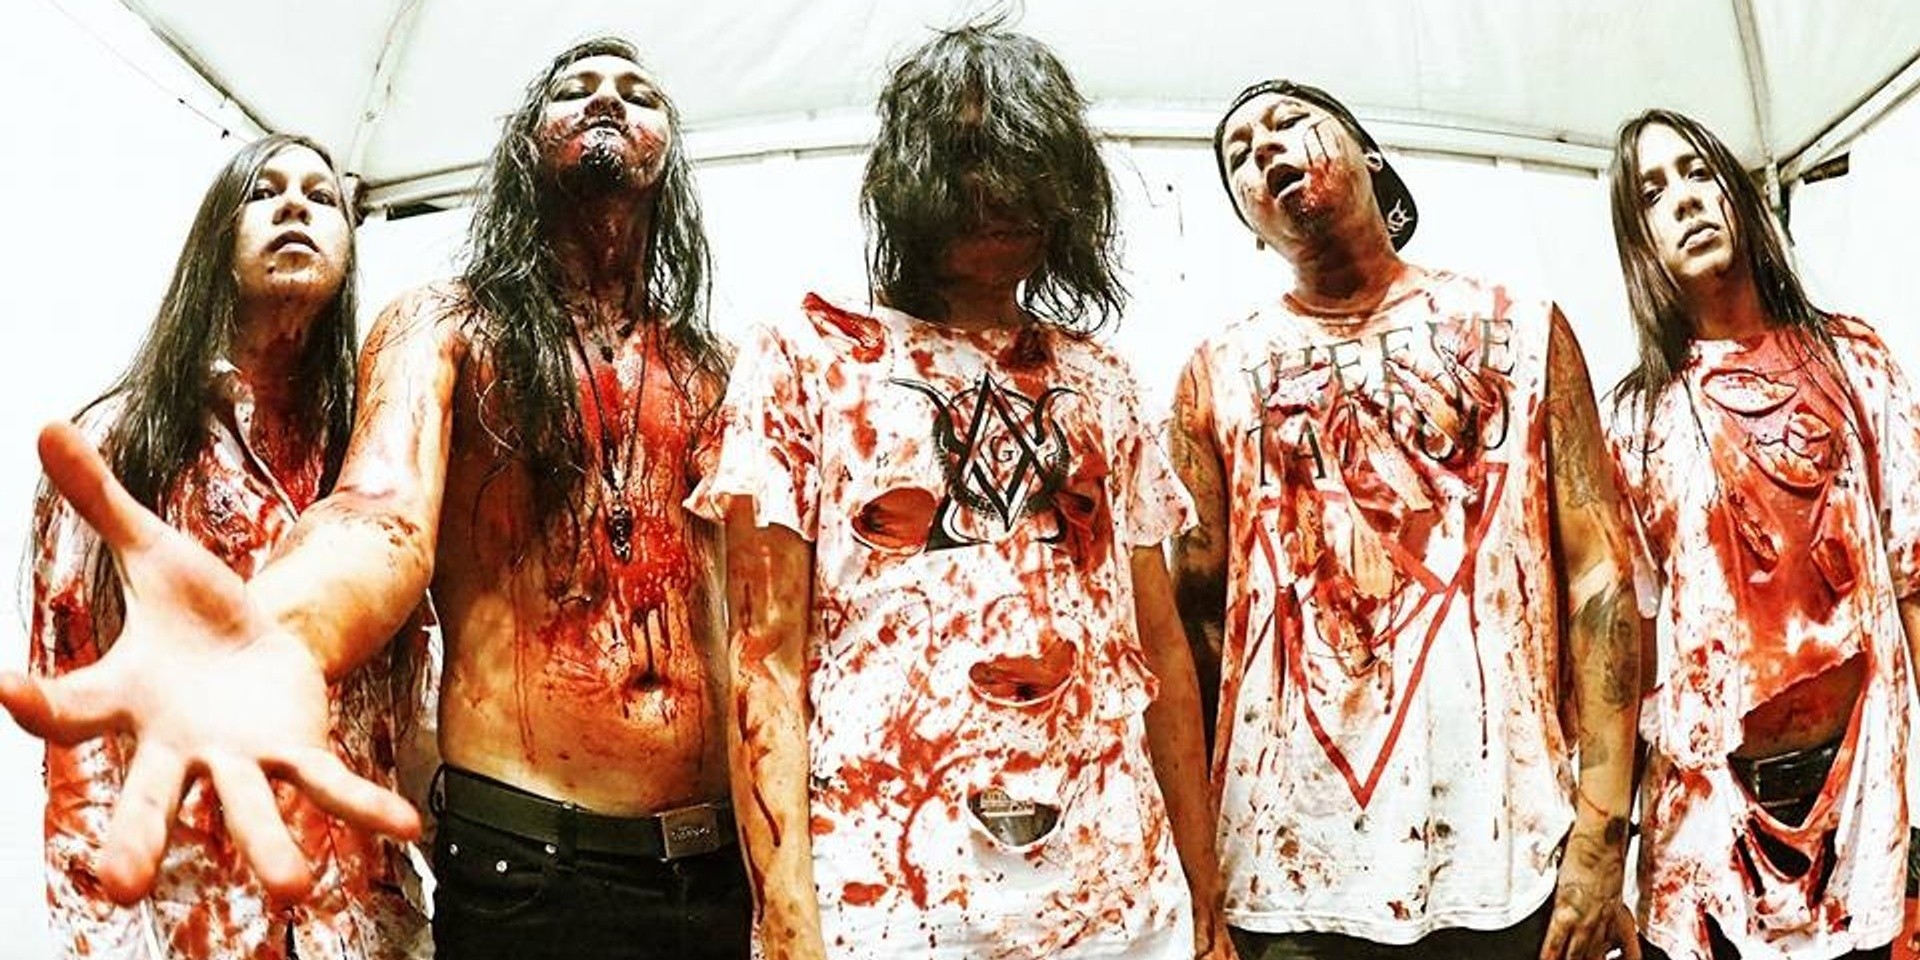 Indonesian death metal titans Deadsquad to perform in Singapore